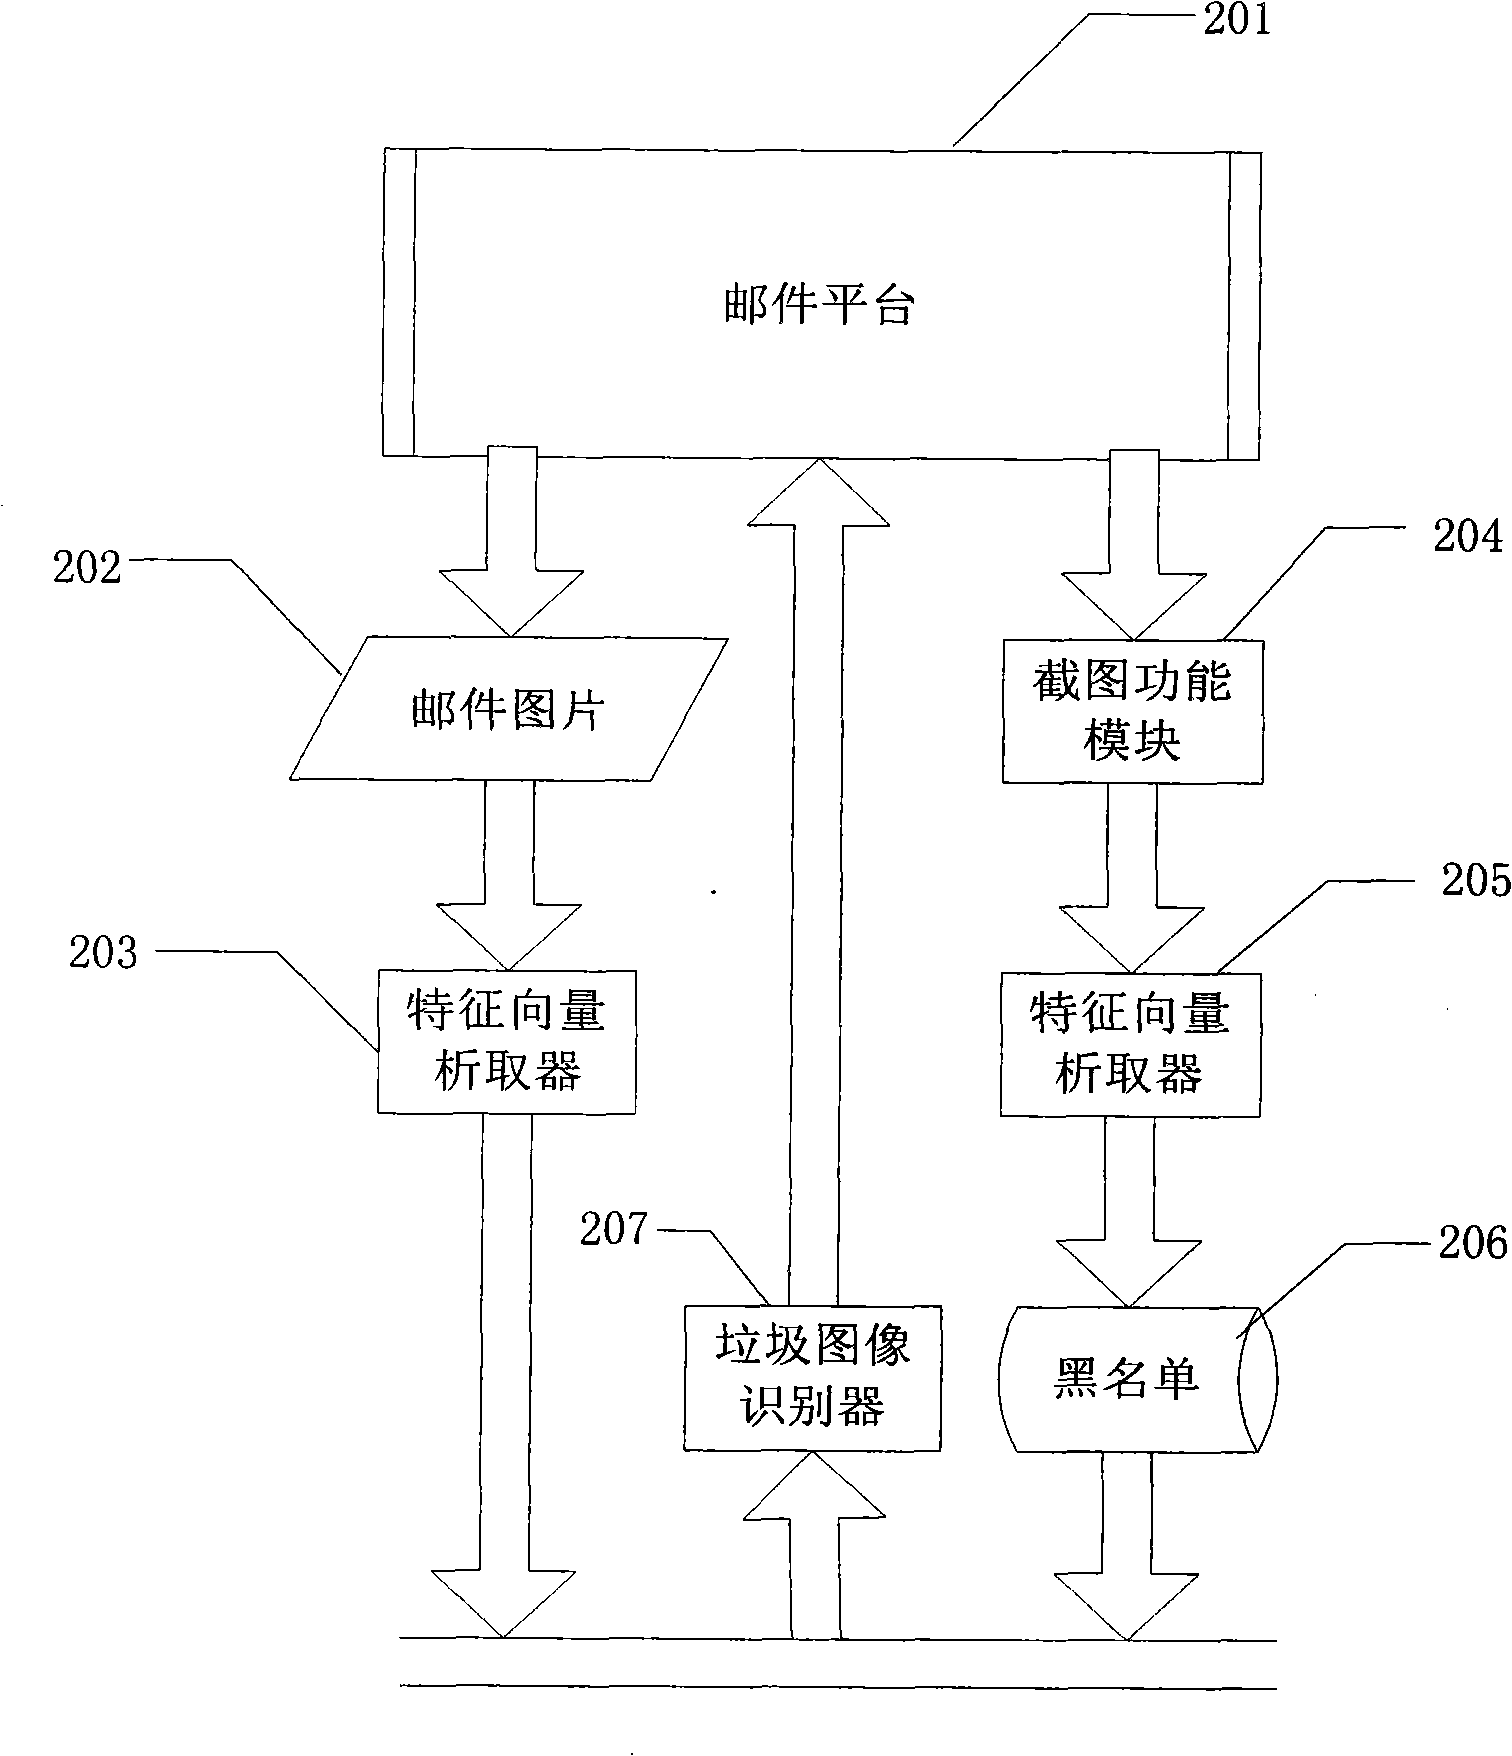 Method and apparatus for preventing picture junk mail